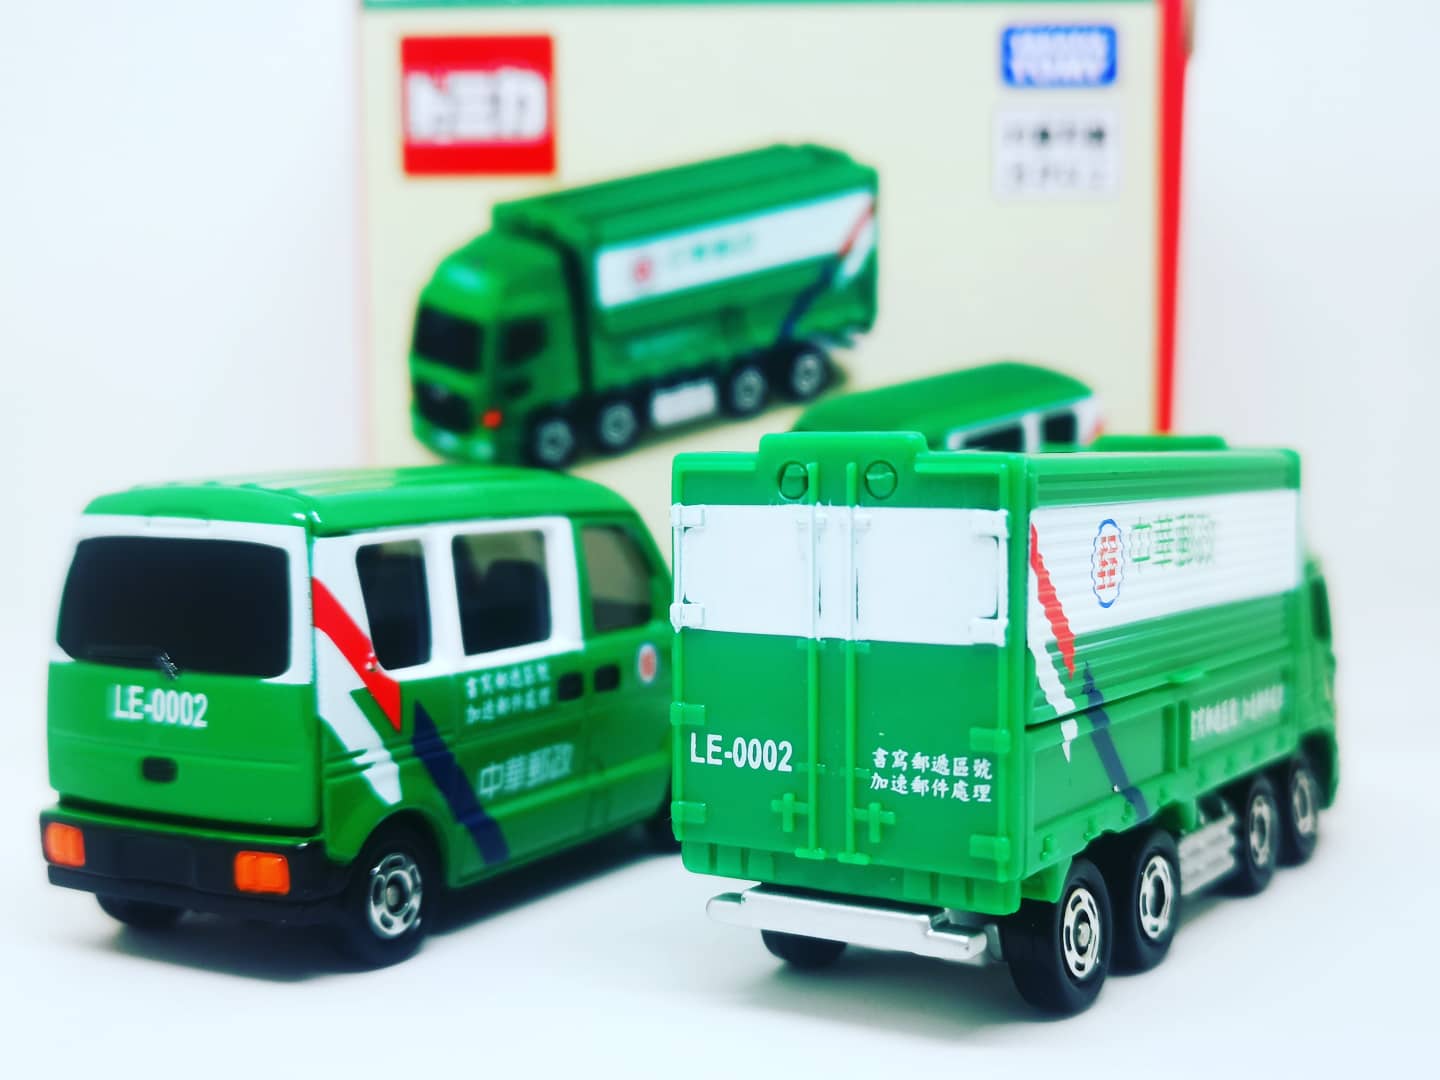 TOMICA Taiwan Chunghwa
(中華郵政) Post Official Exclusive item